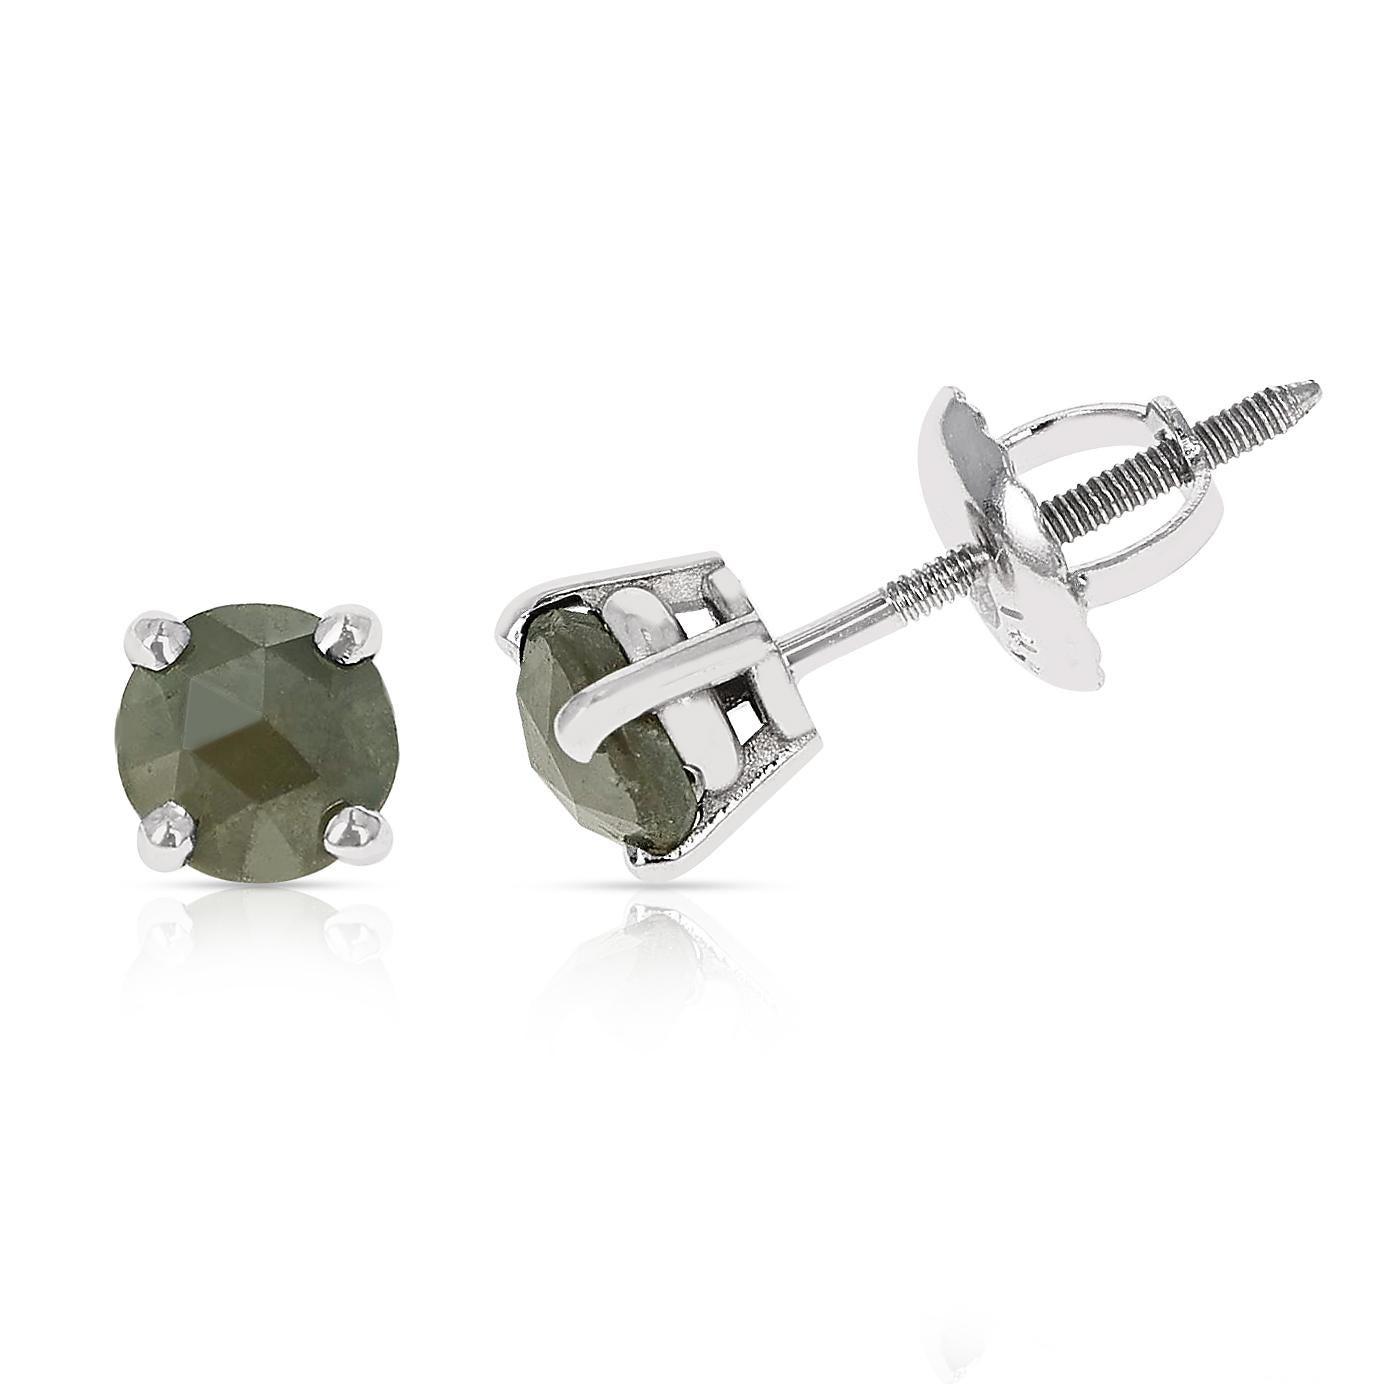 A pair of 4MM Rose Cut Gray Diamond Stud Earrings made in 14K White Gold. The total stone weight is 0.67 carats.